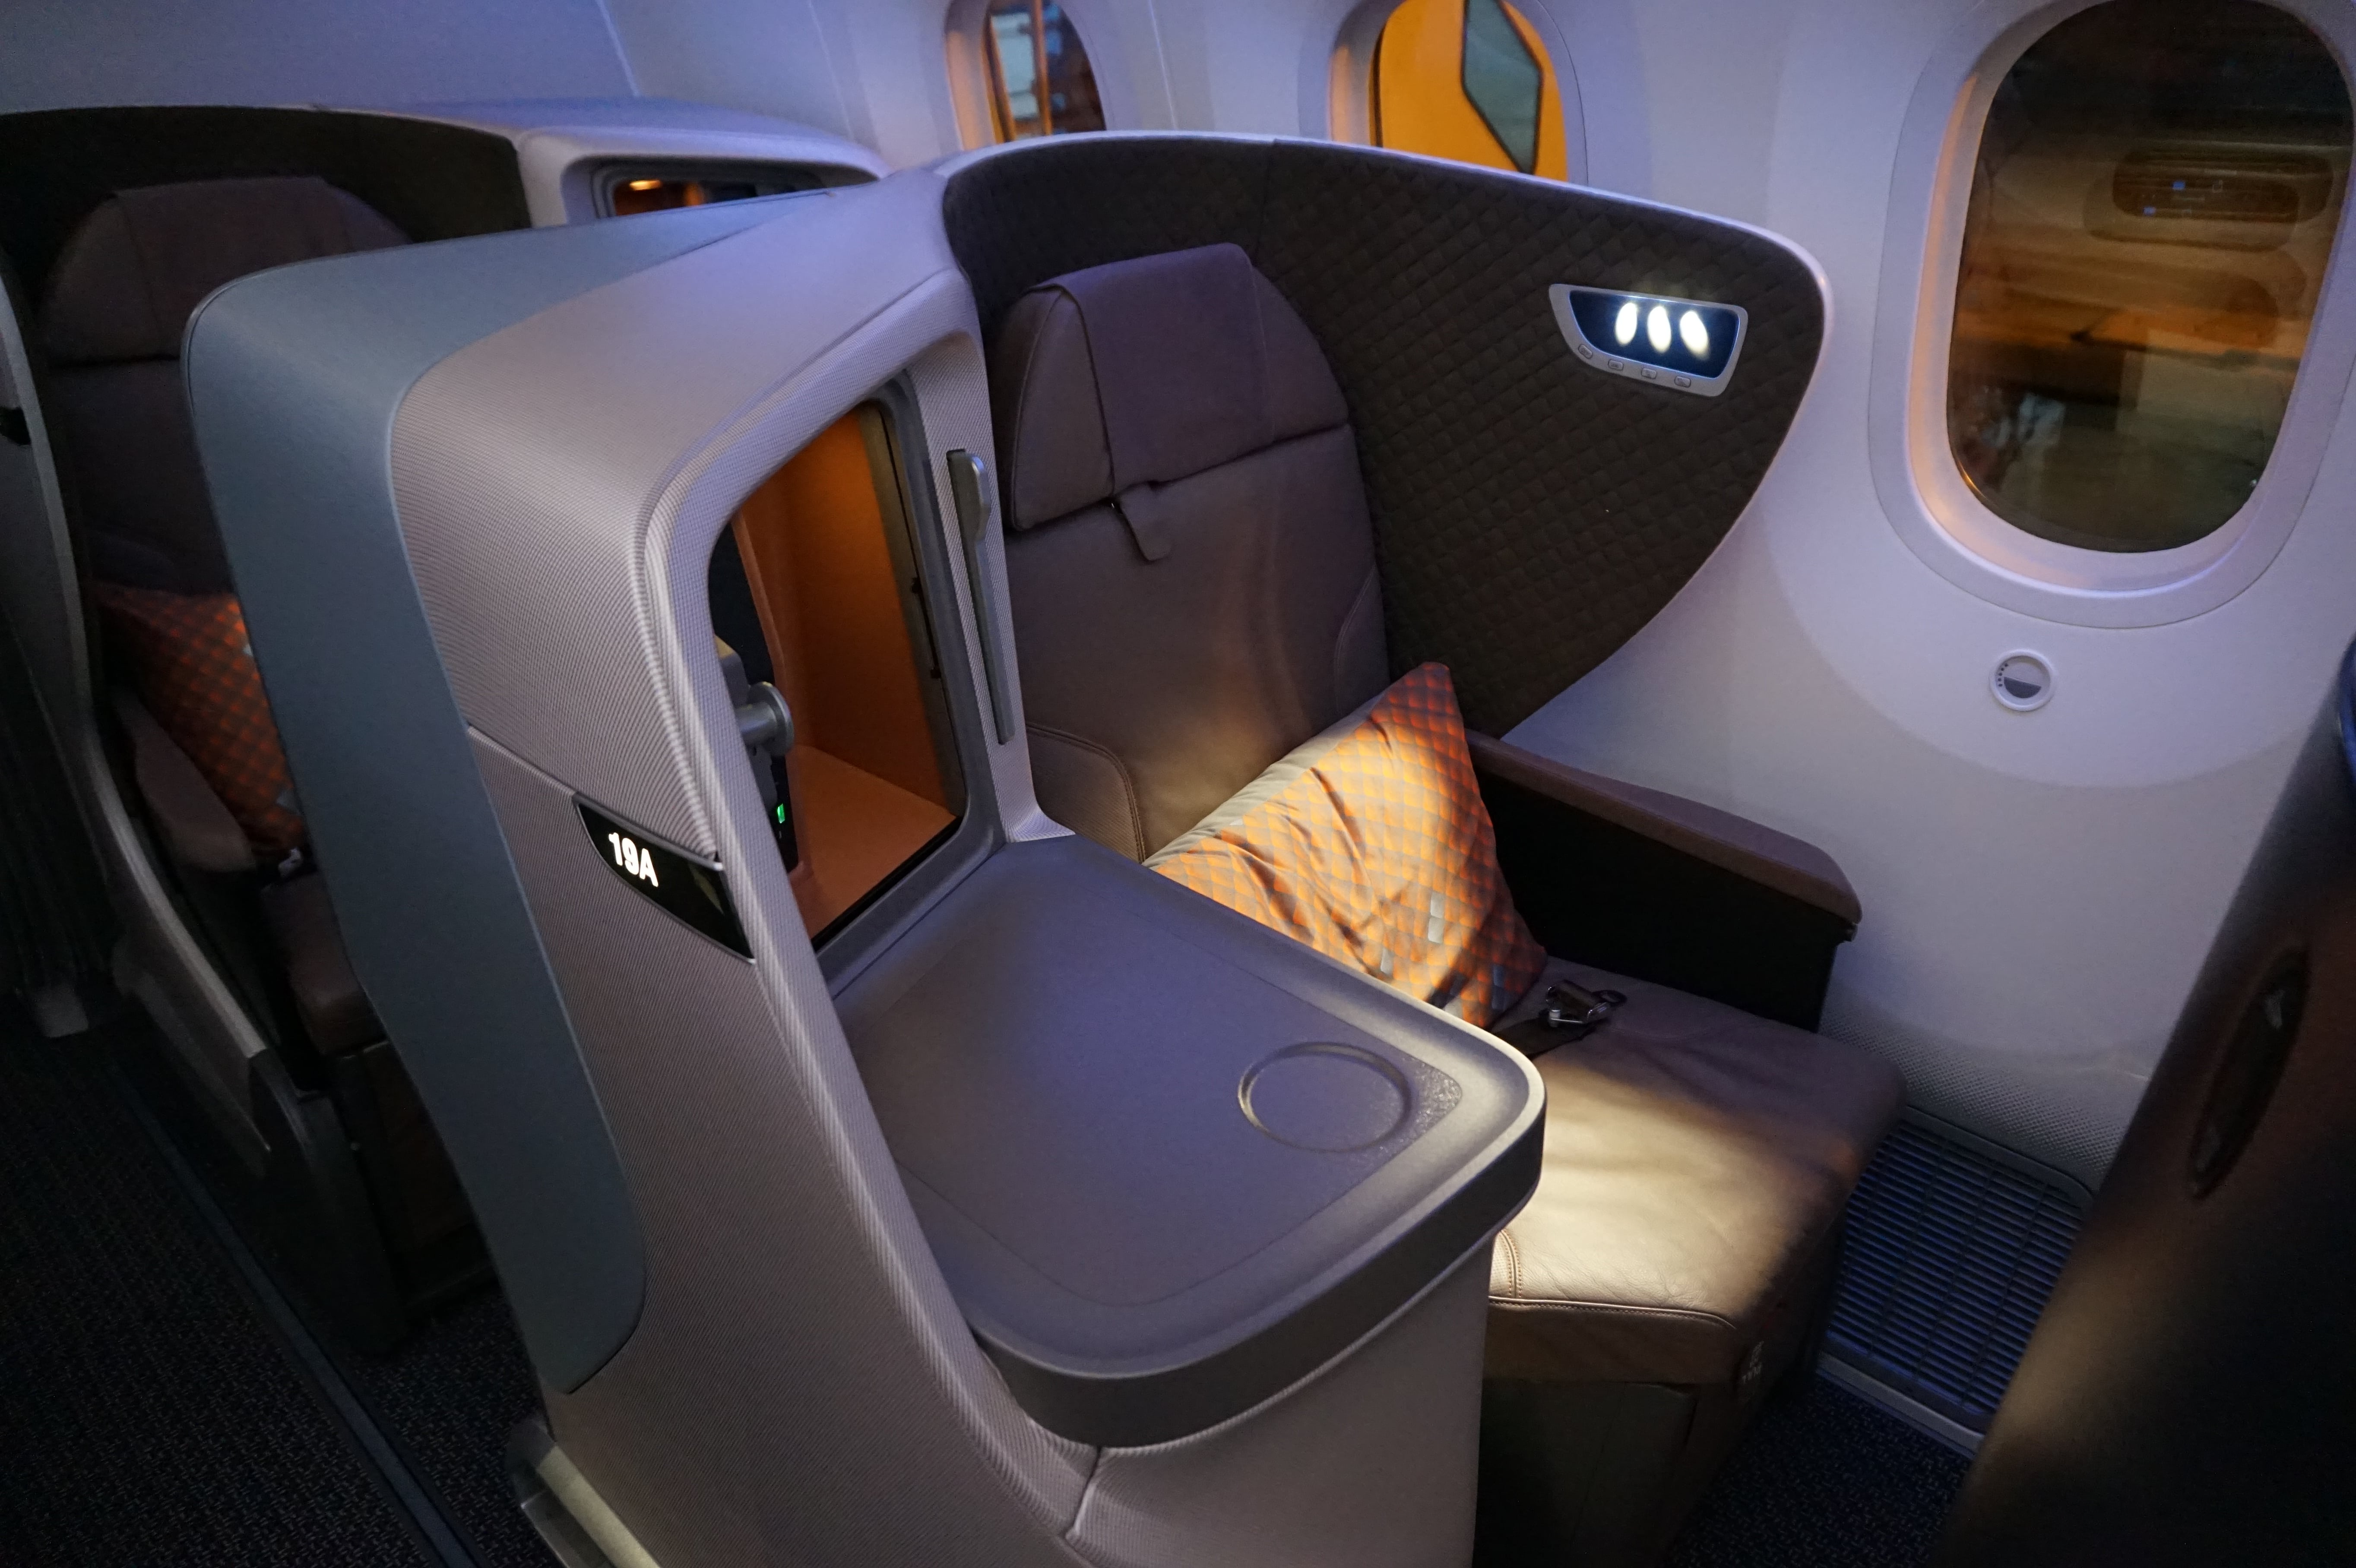 Singapore Airlines Fleet and Seat Guide (July 2019 update) | The Milelion